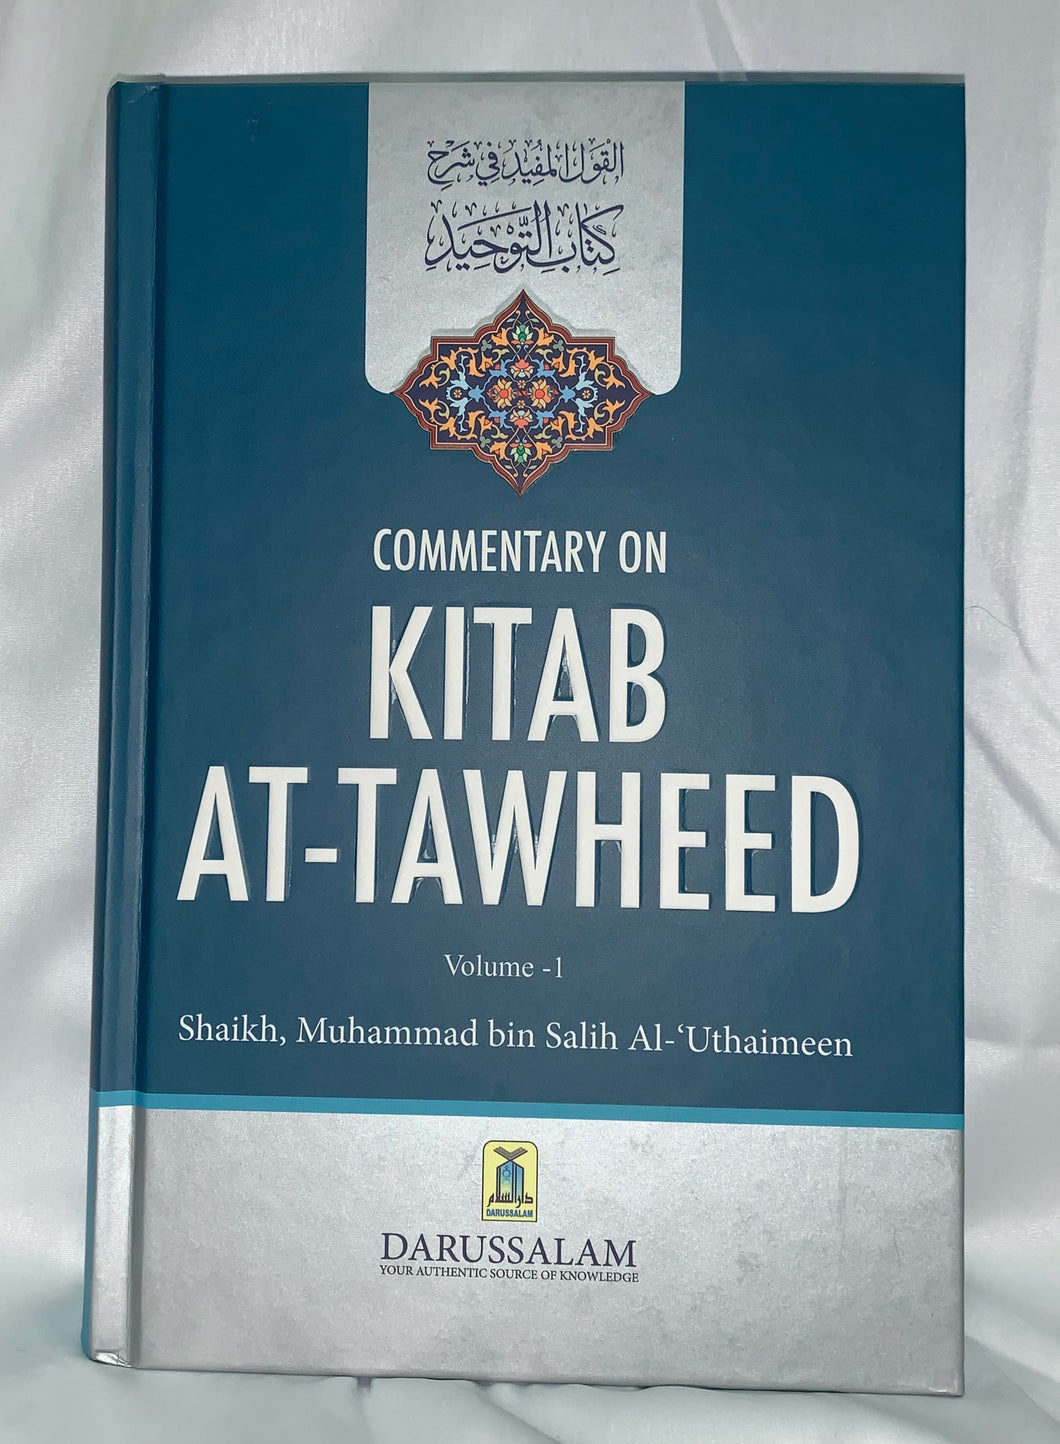 Commentary on Kitab At-Tawheed (Volume 1+2)